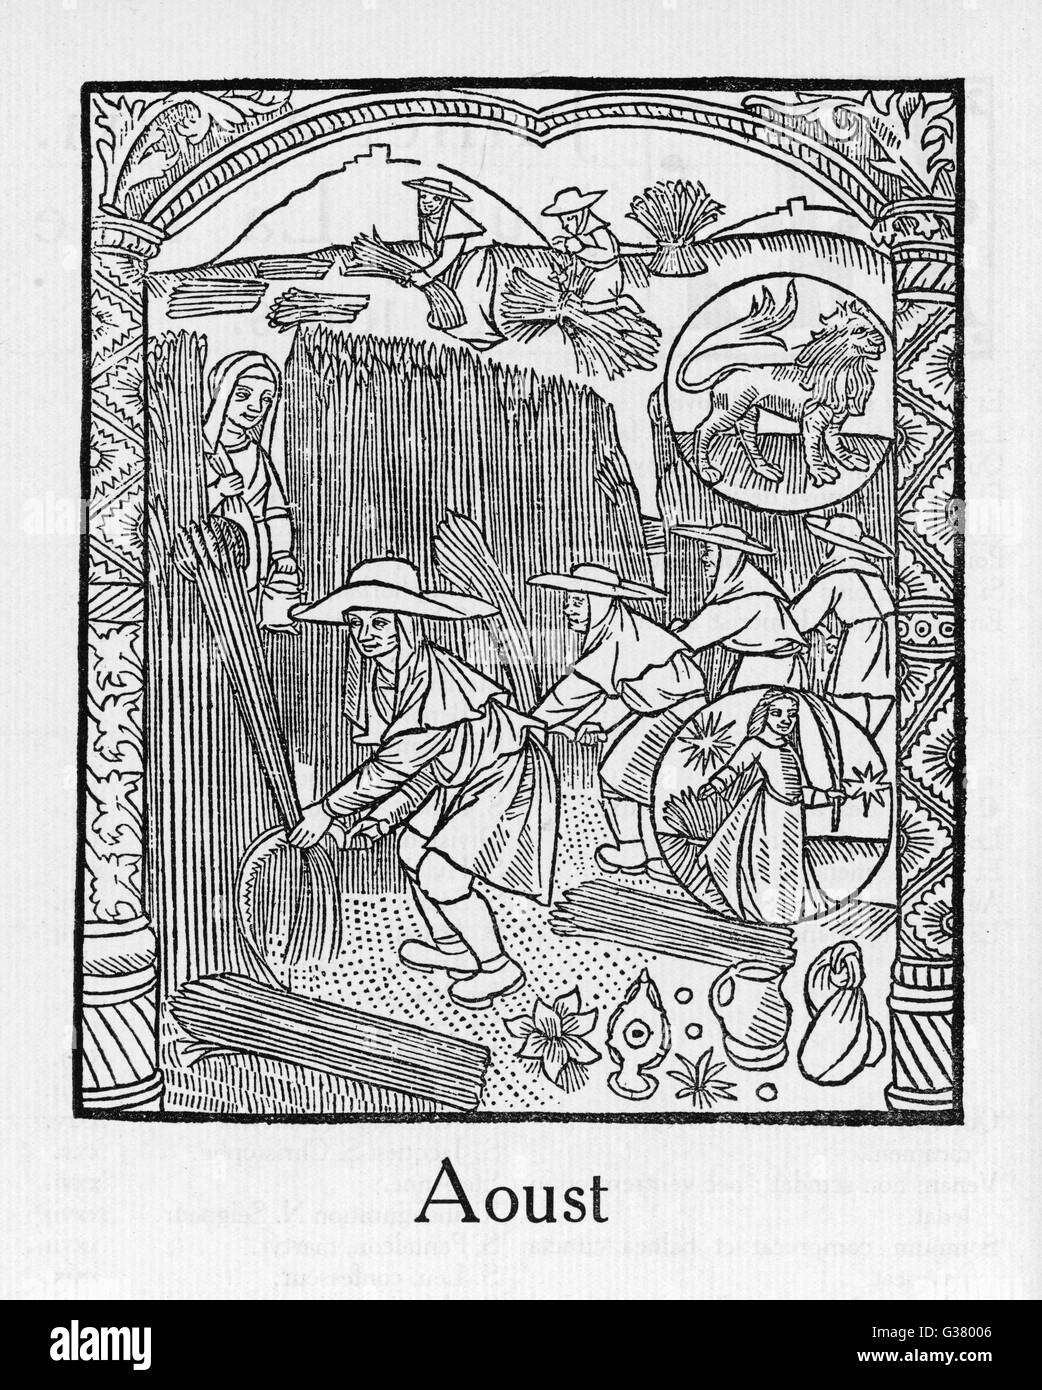 'doit faucher et fener par  plaisir...' [a time to reap and a time to  gather]       Date: 16th century Stock Photo